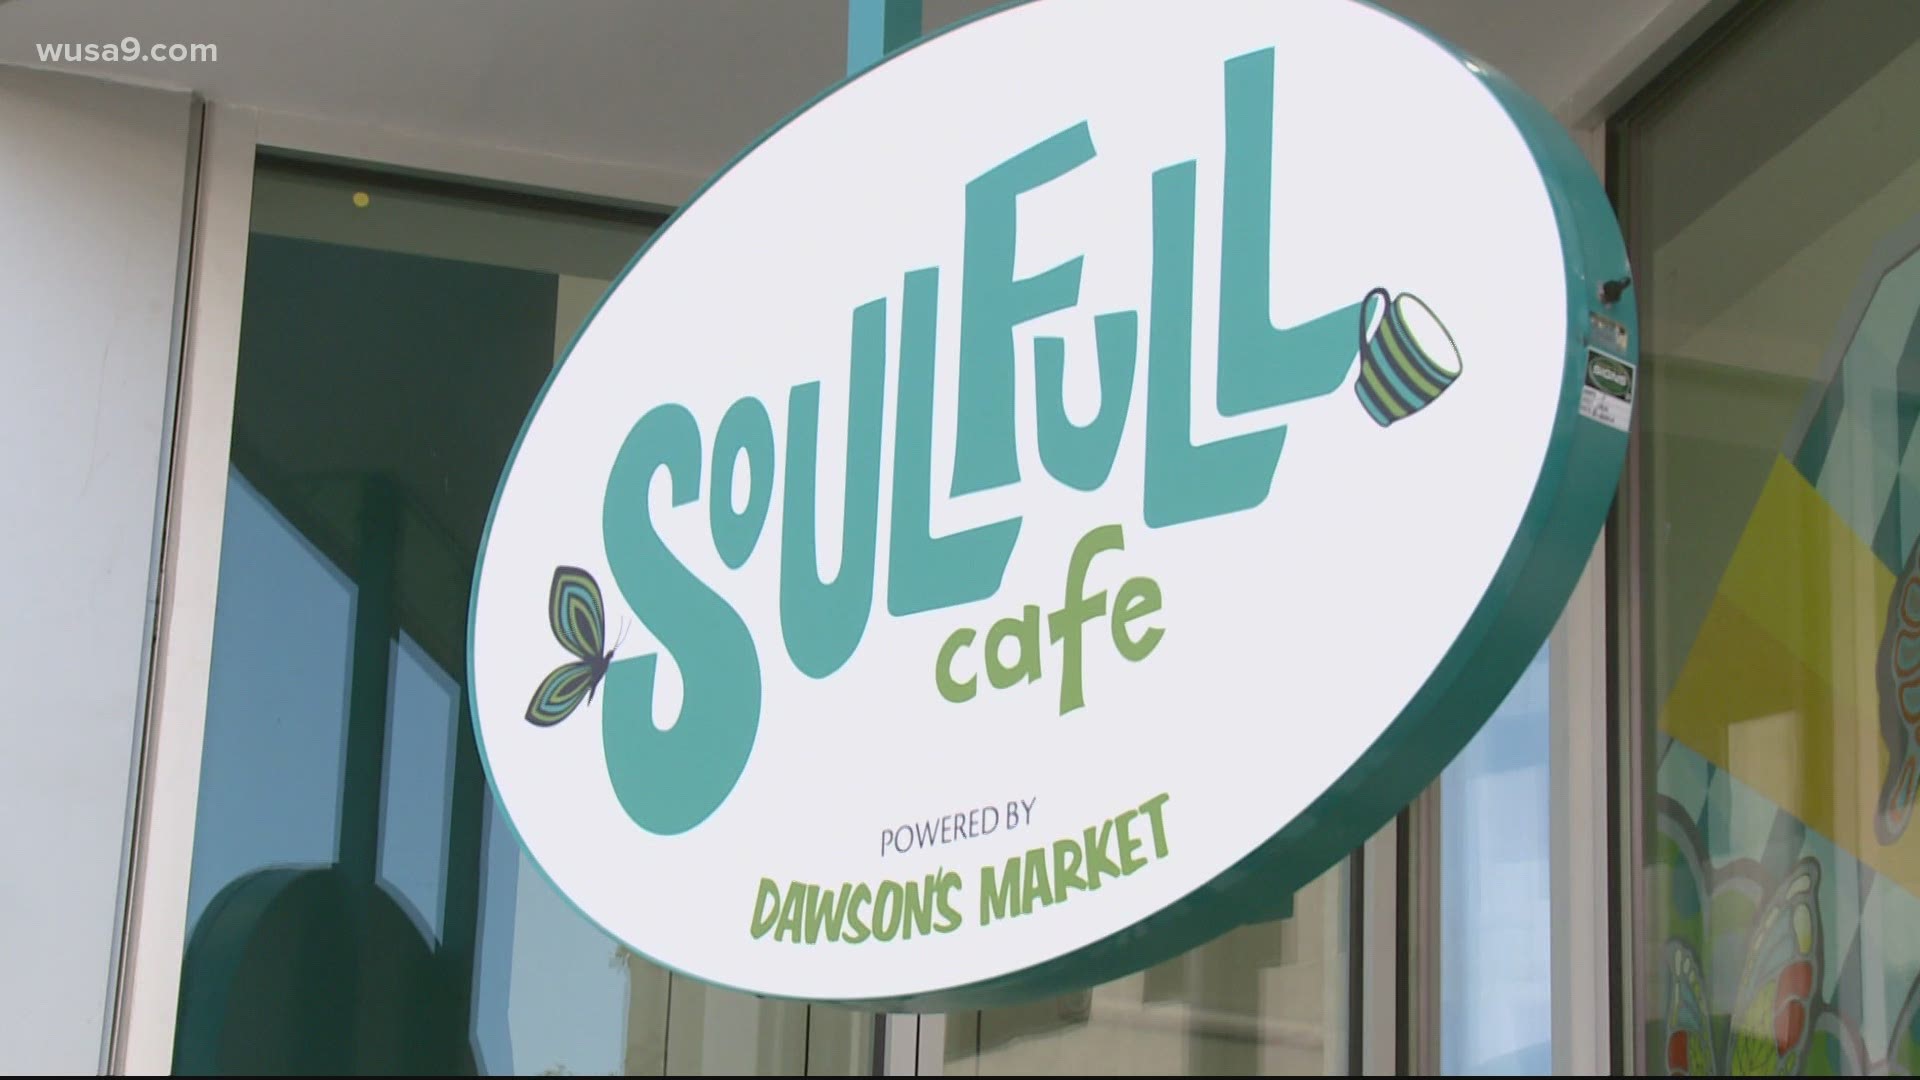 The Soulfull Cafe is a new cafe that serves cold brews and new opportunities for locals who have special needs